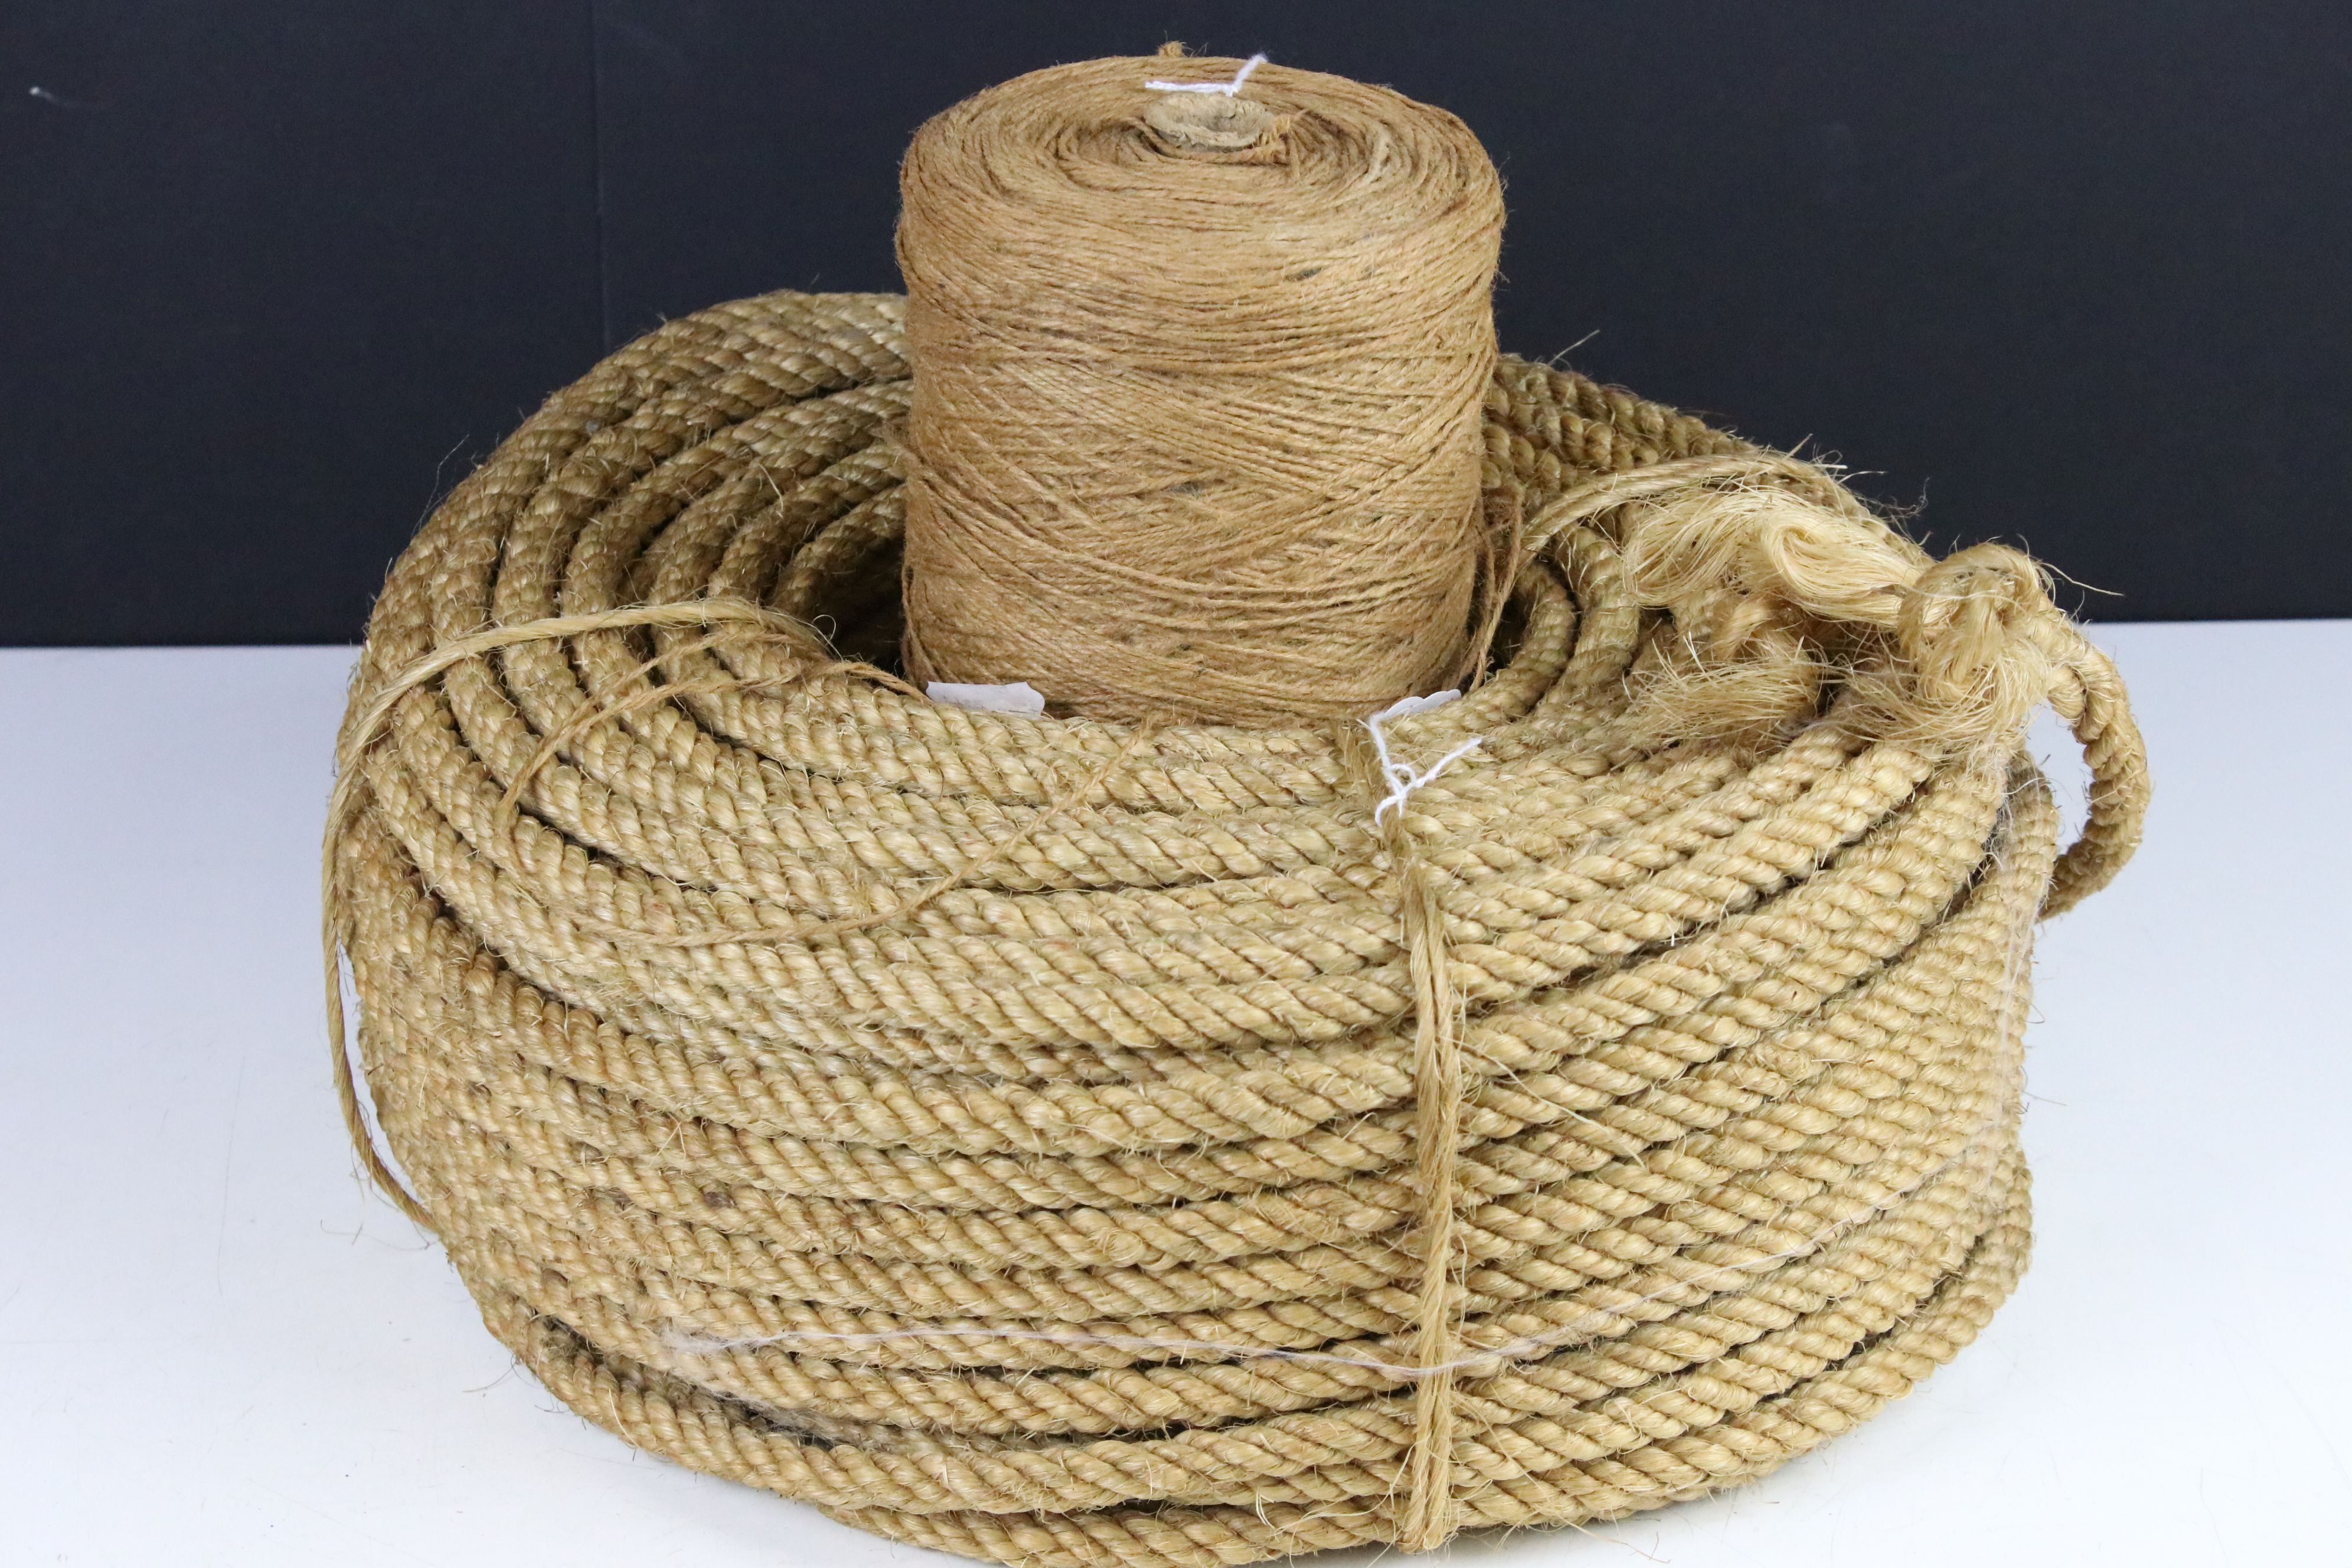 A vintage ball of brown string together with a roll of rope.